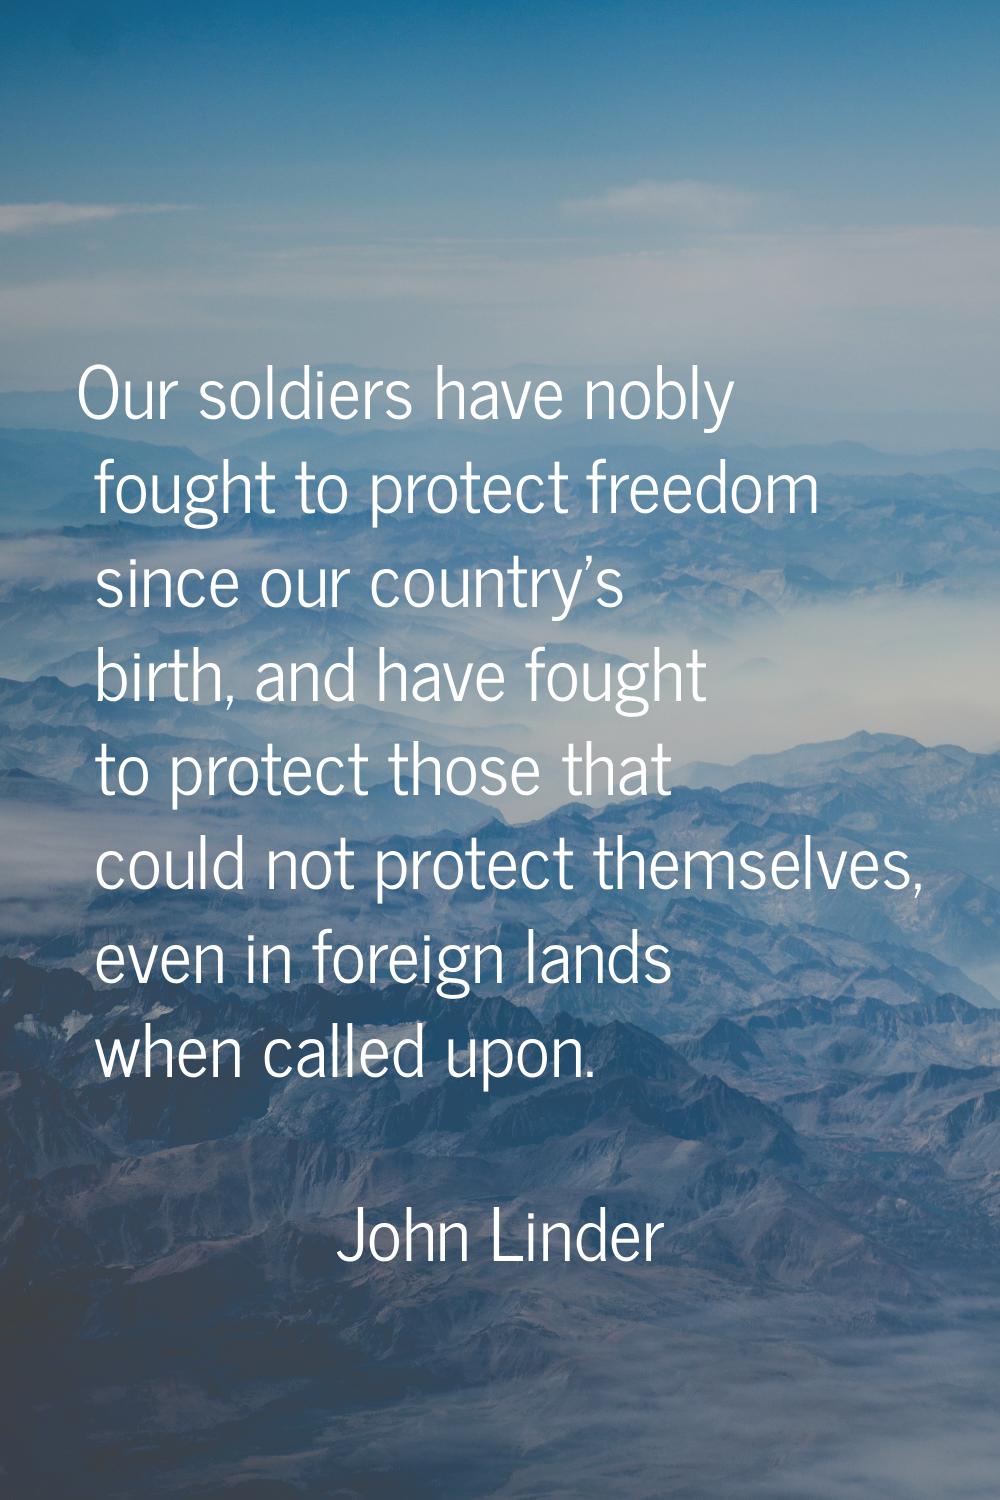 Our soldiers have nobly fought to protect freedom since our country's birth, and have fought to pro